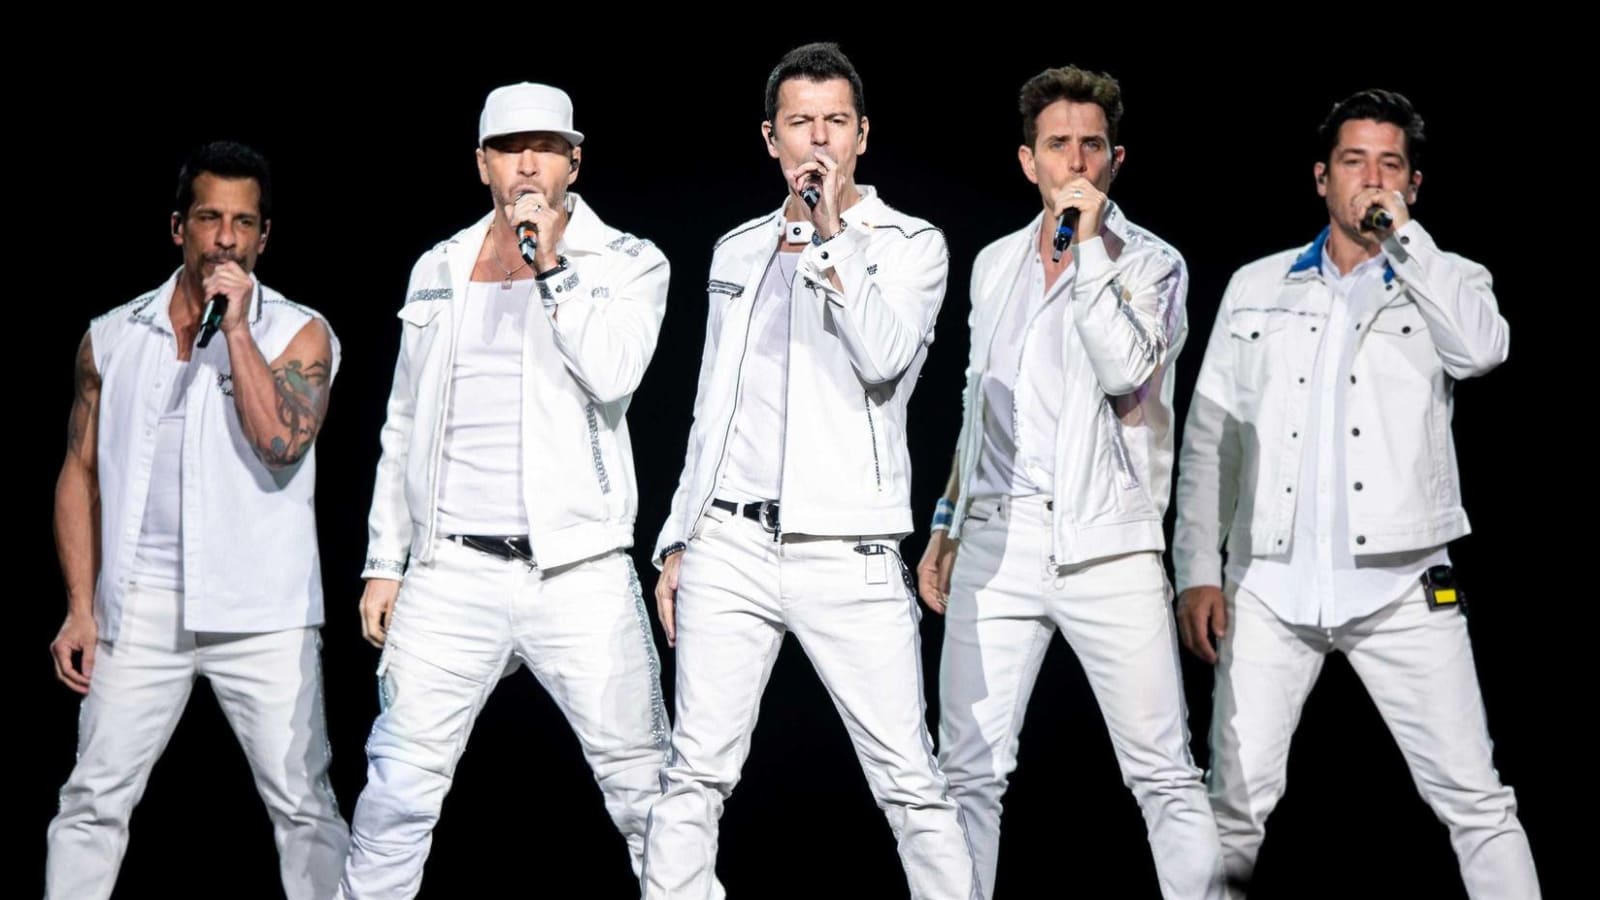 New Kids on the Block perform medley with Kelly Clarkson and Salt-N-Pepa